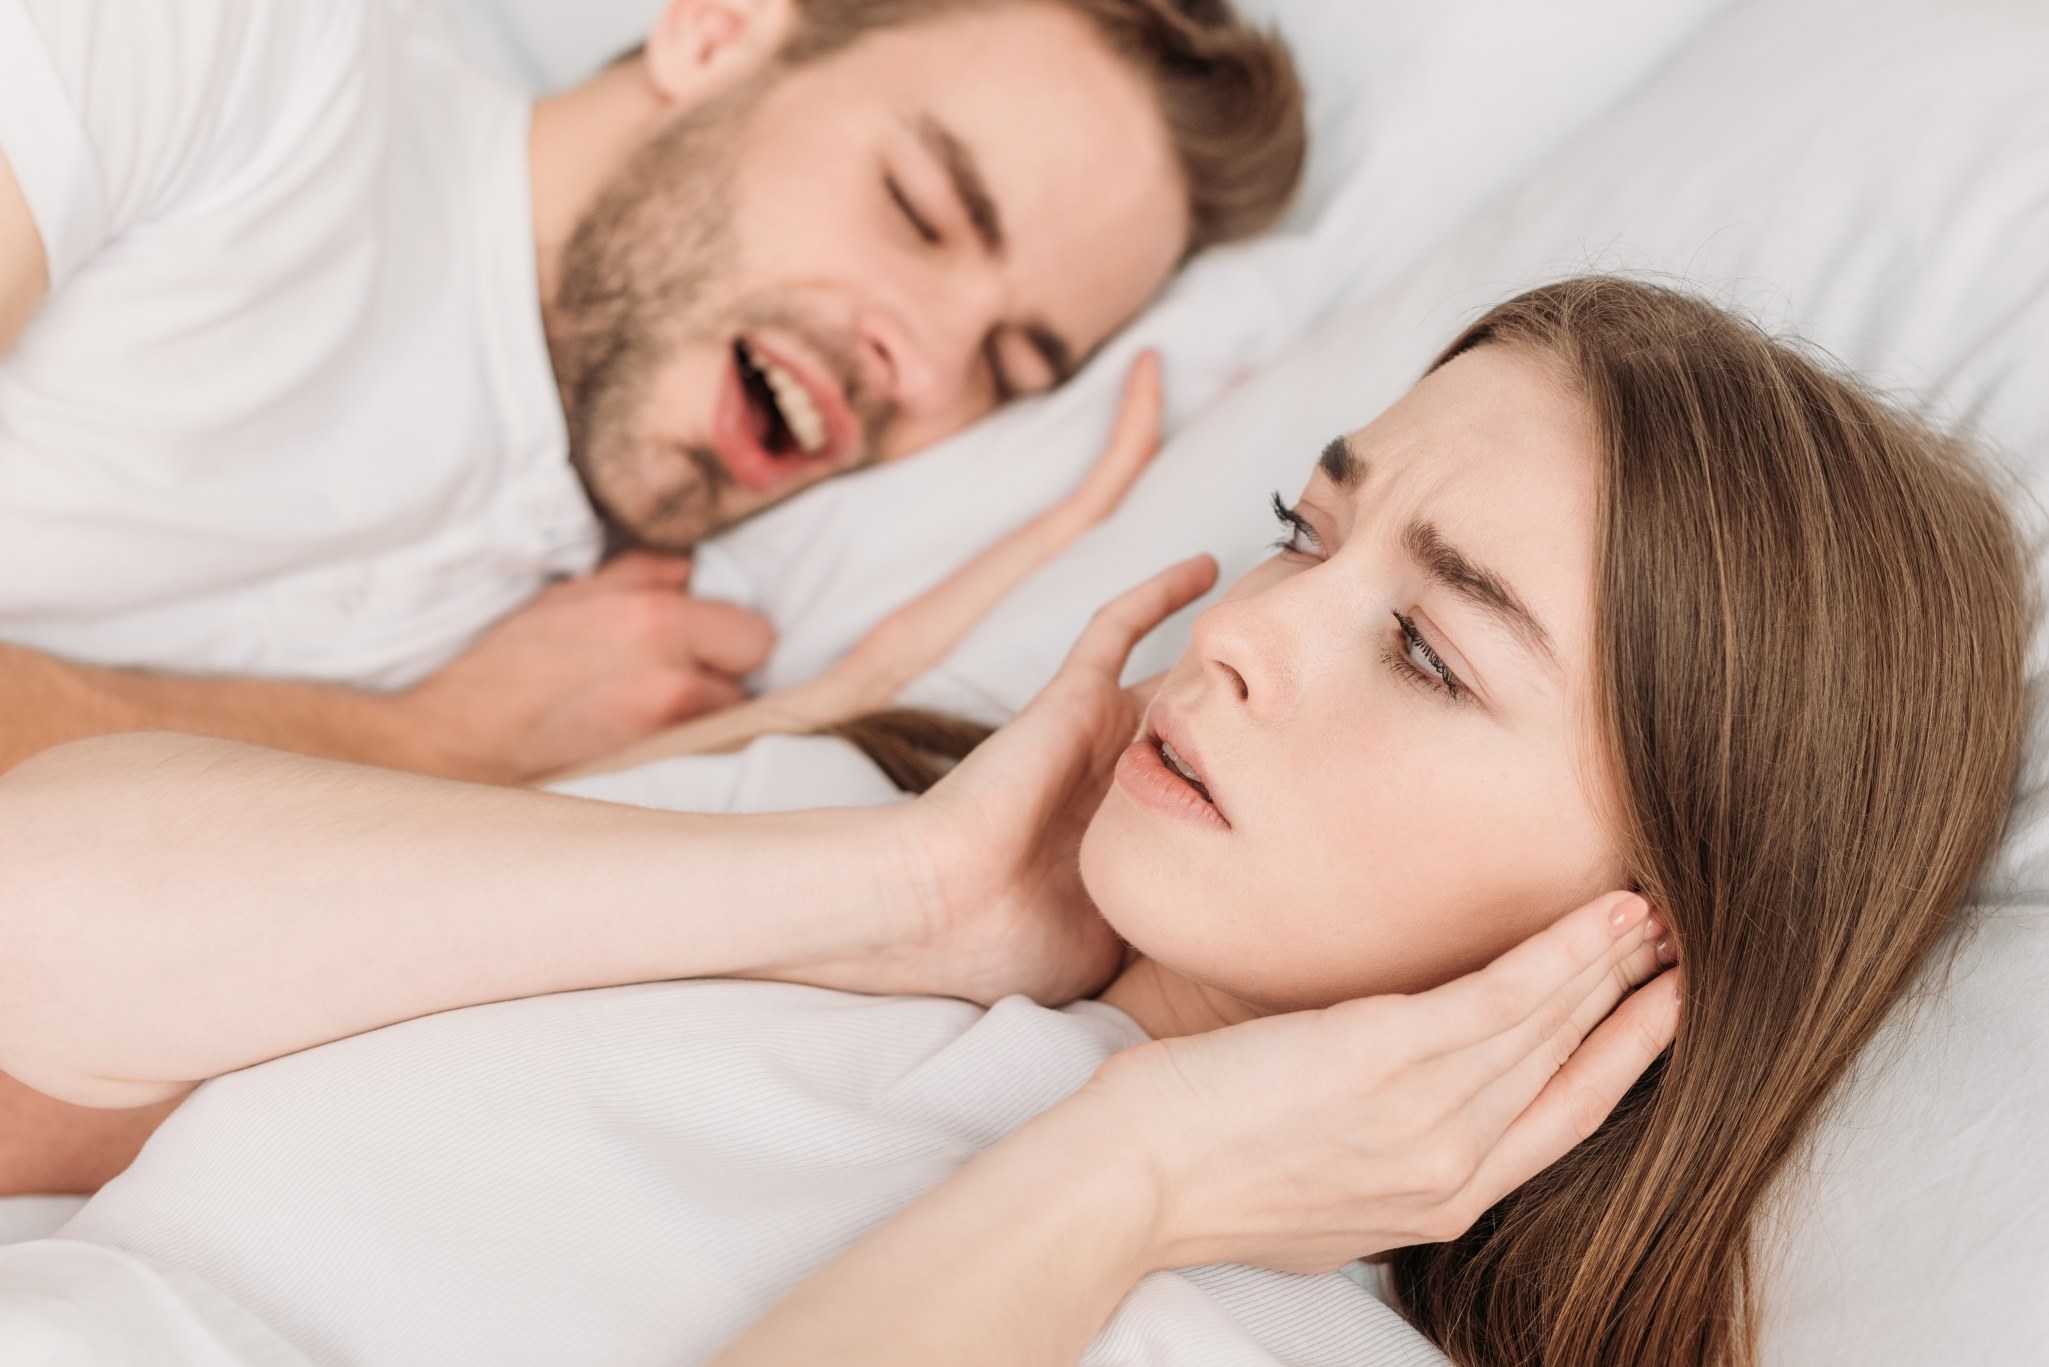 Man snoring and woman plugging ears with hands.